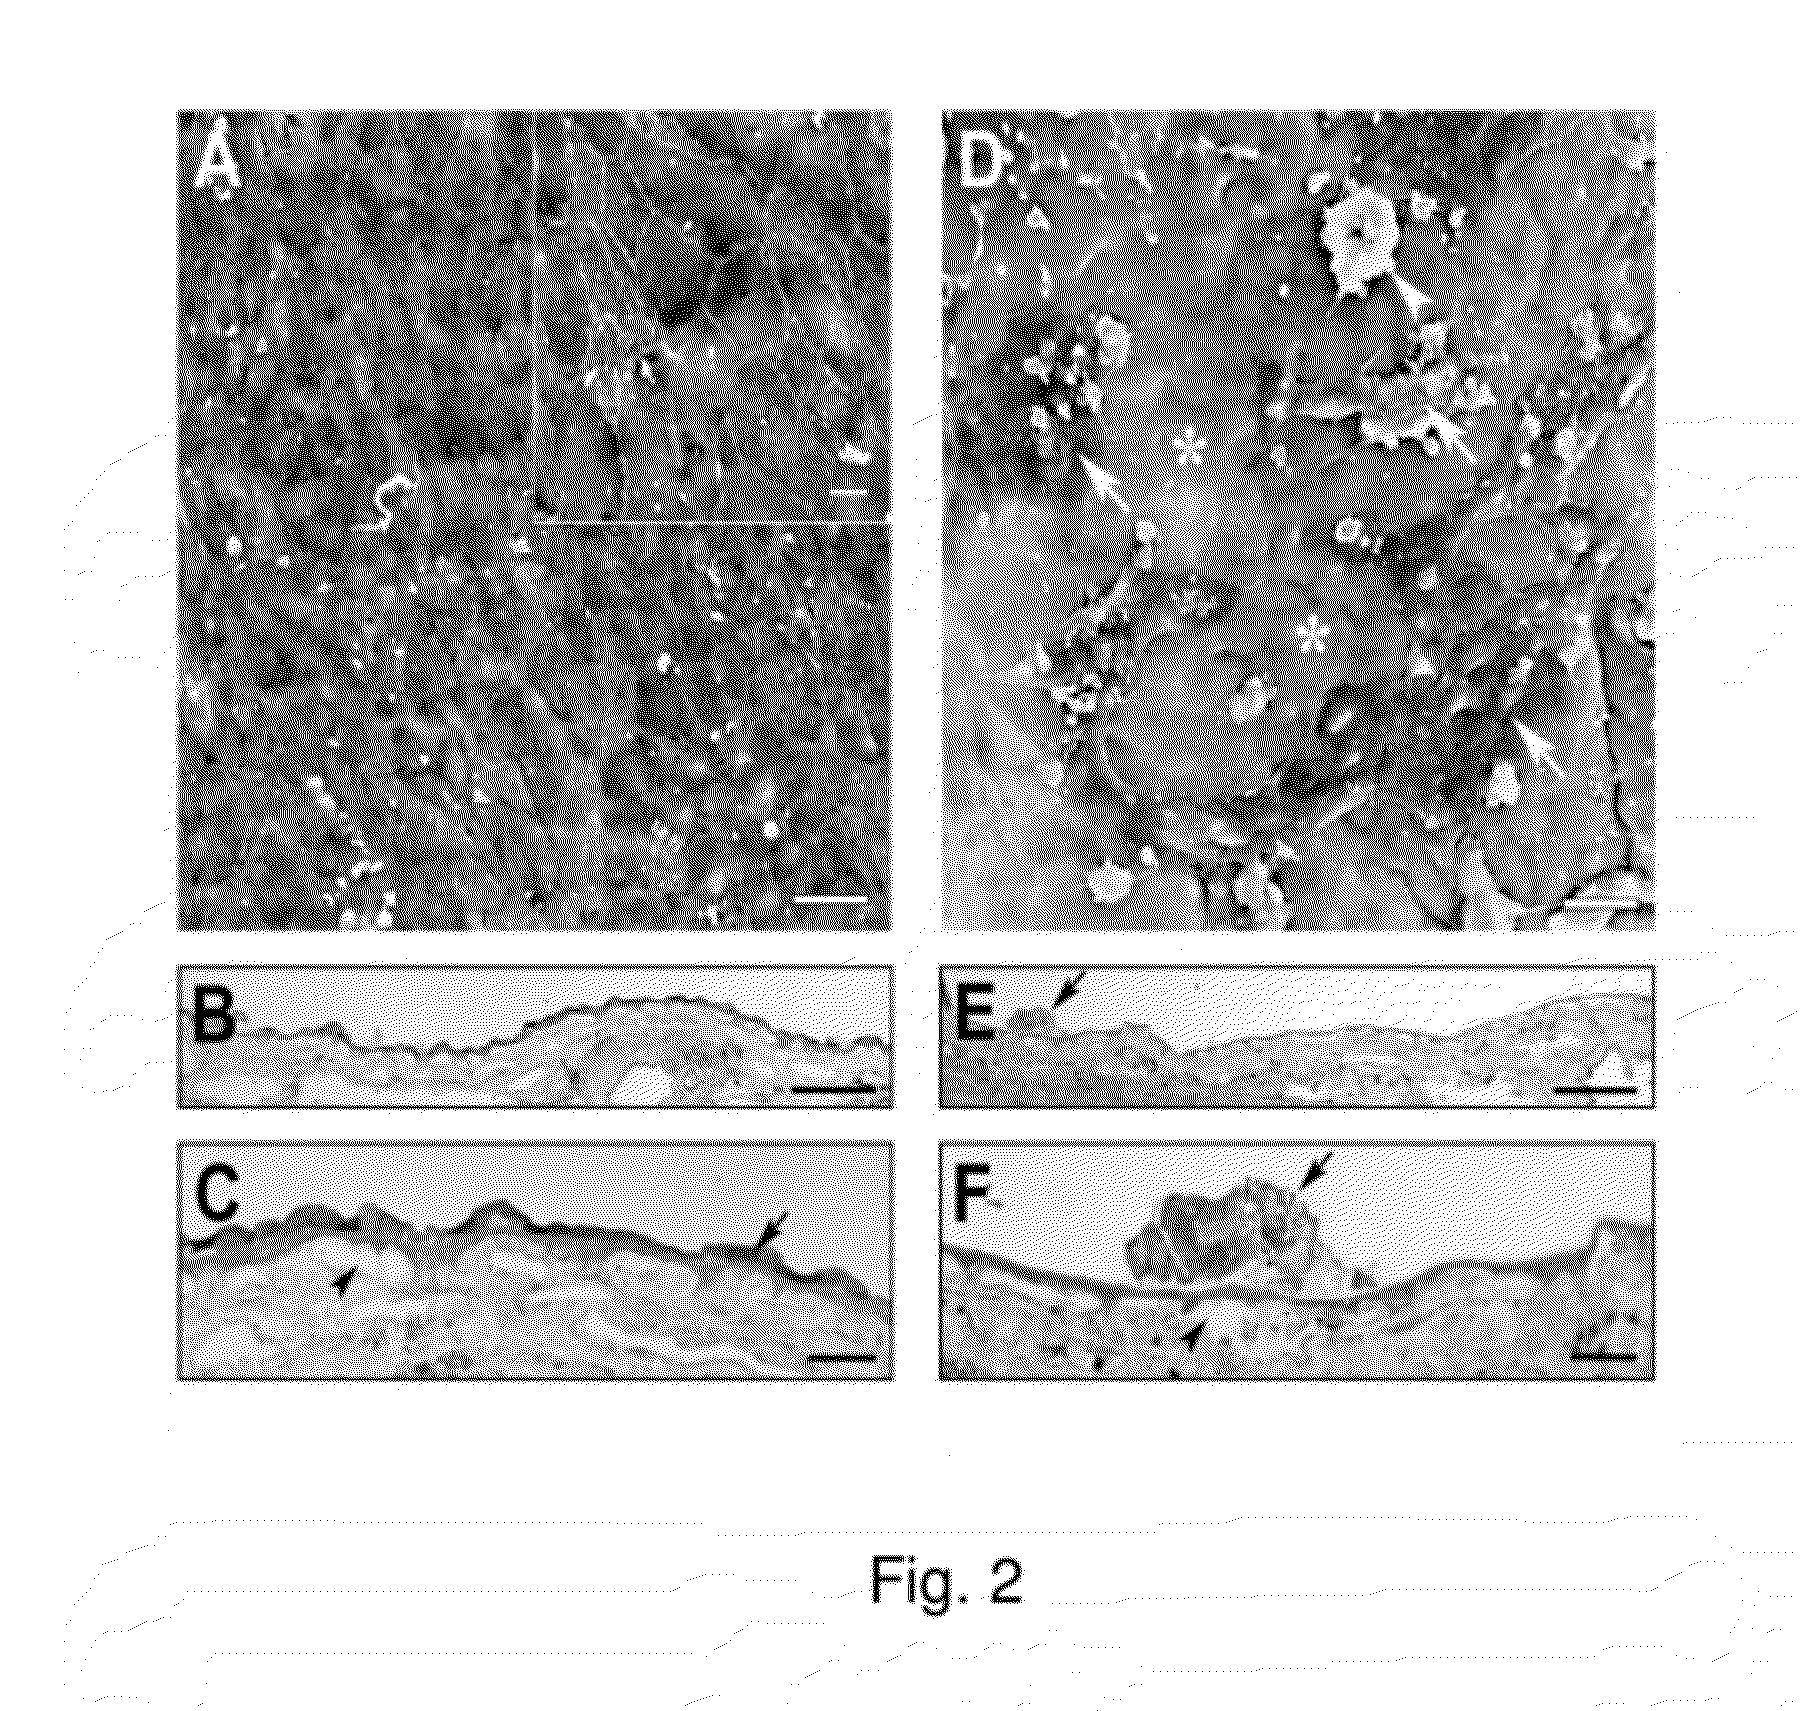 Production of extracellular matrix, conditioned media and uses thereof